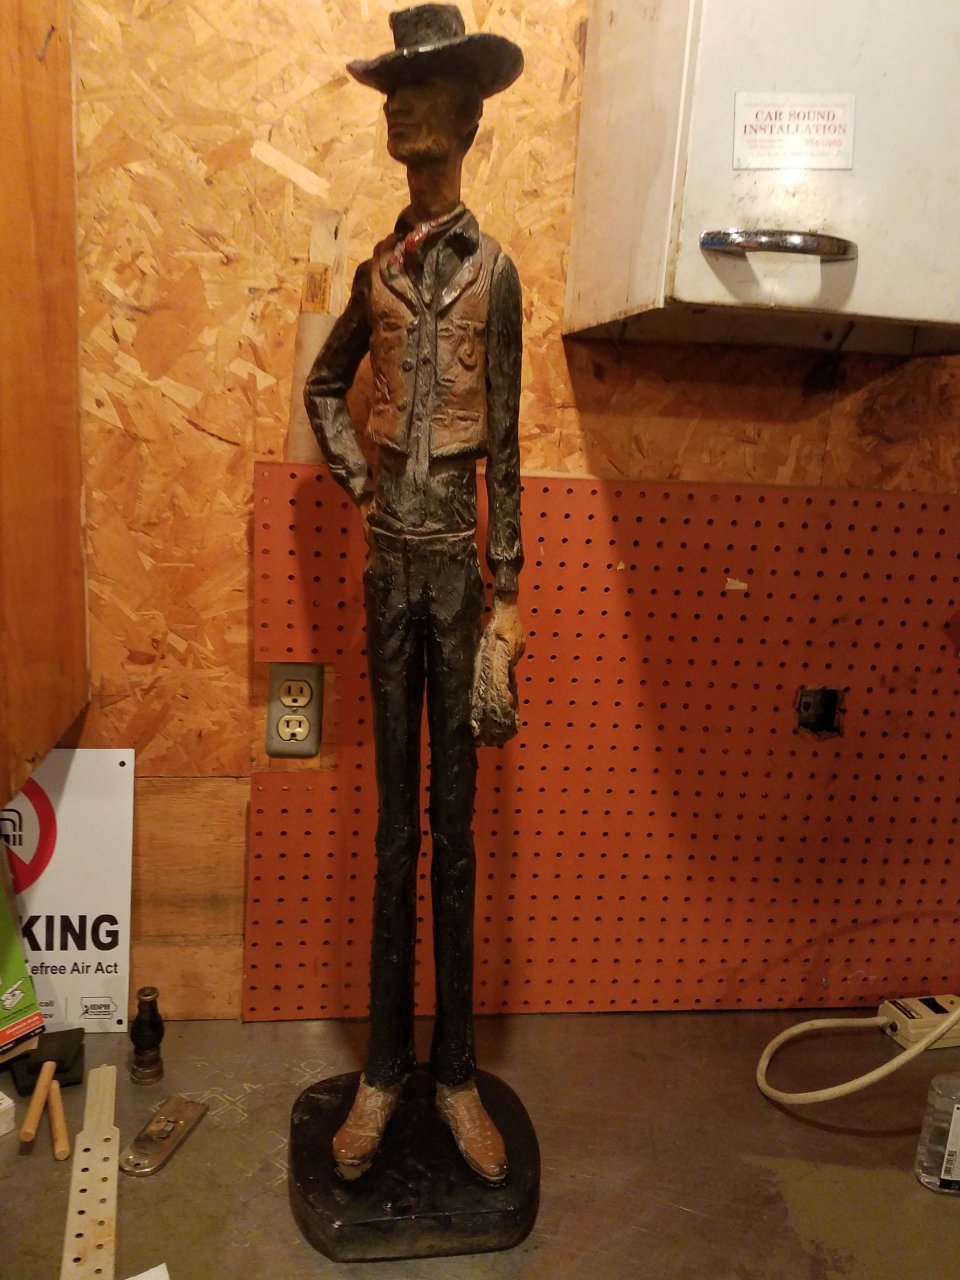 1972 Austin Sculpture 3foot Slim Cowboy Holding A Rope. Cannot Find